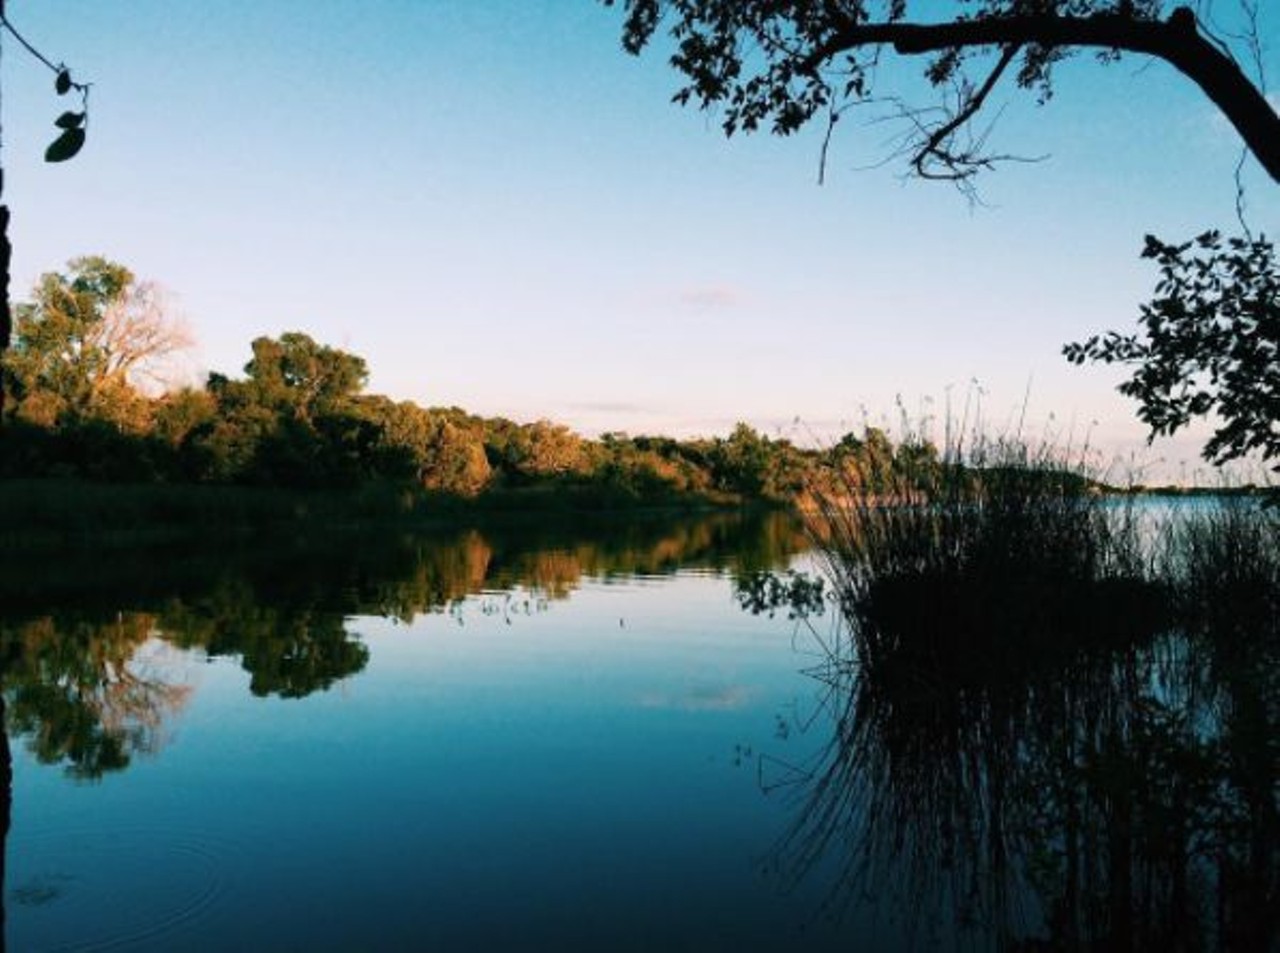 Cleburne State Park
5800 Park Rd 21, Cleburne,  tpwd.texas.gov/state-parks/cleburne
The 528-acre state park offers a ton of room for campers looking for some peace and privacy. 
Photo via Instagram,  drewshakalaka